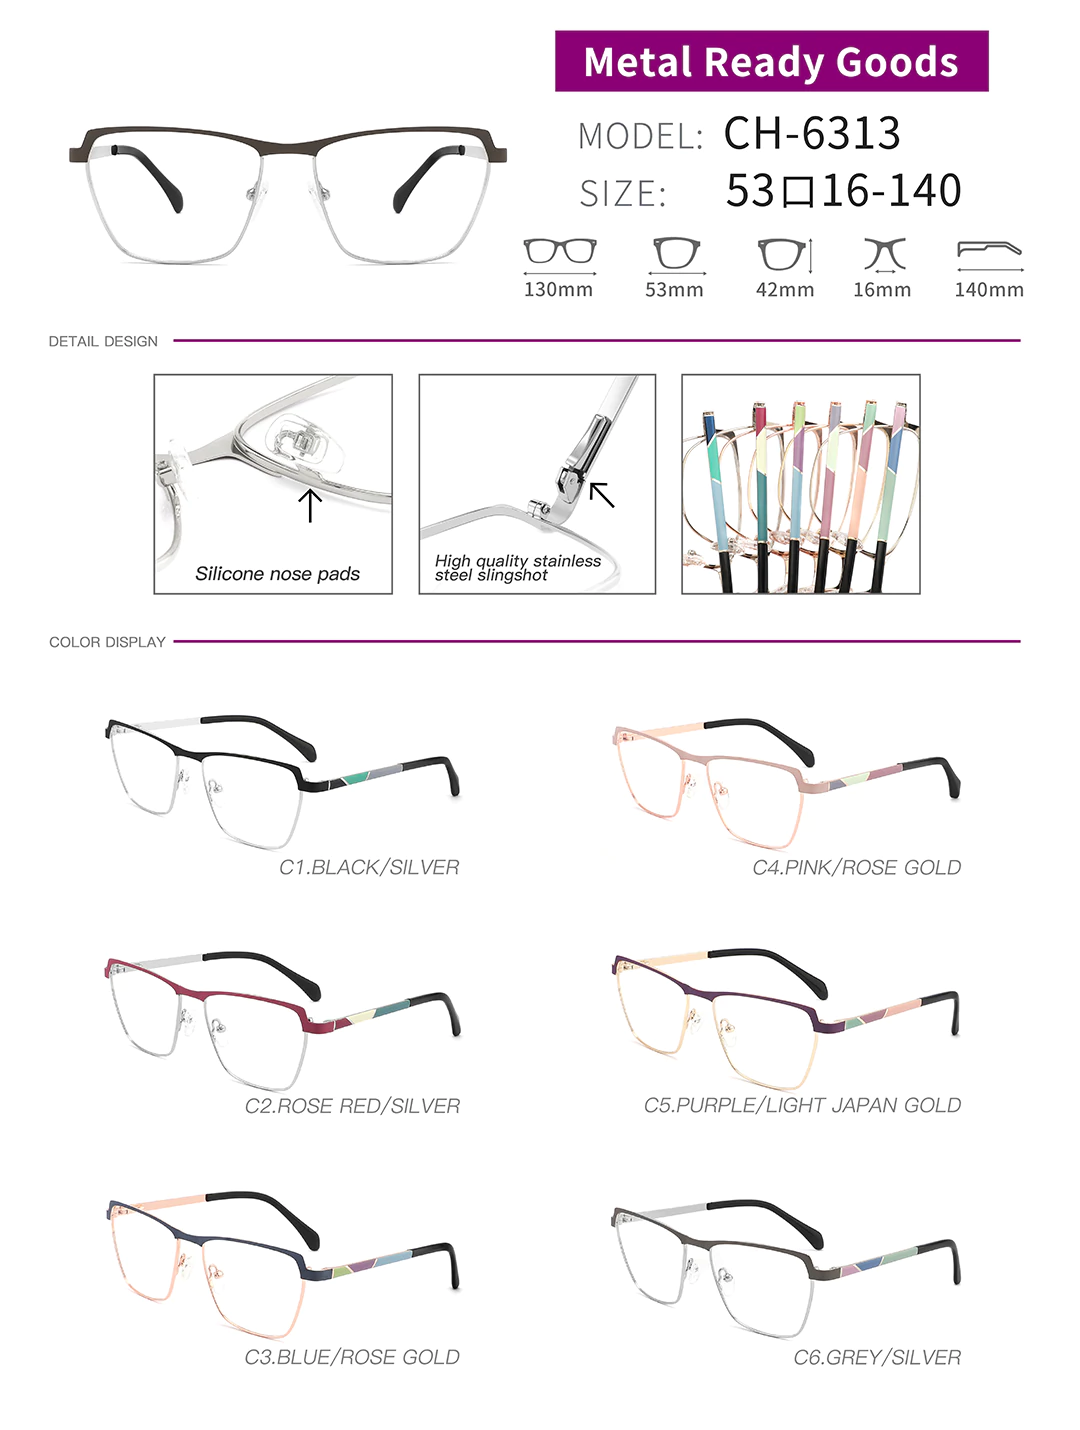 3D printed glasses CH-6313 in different colors, sizes and detail shots